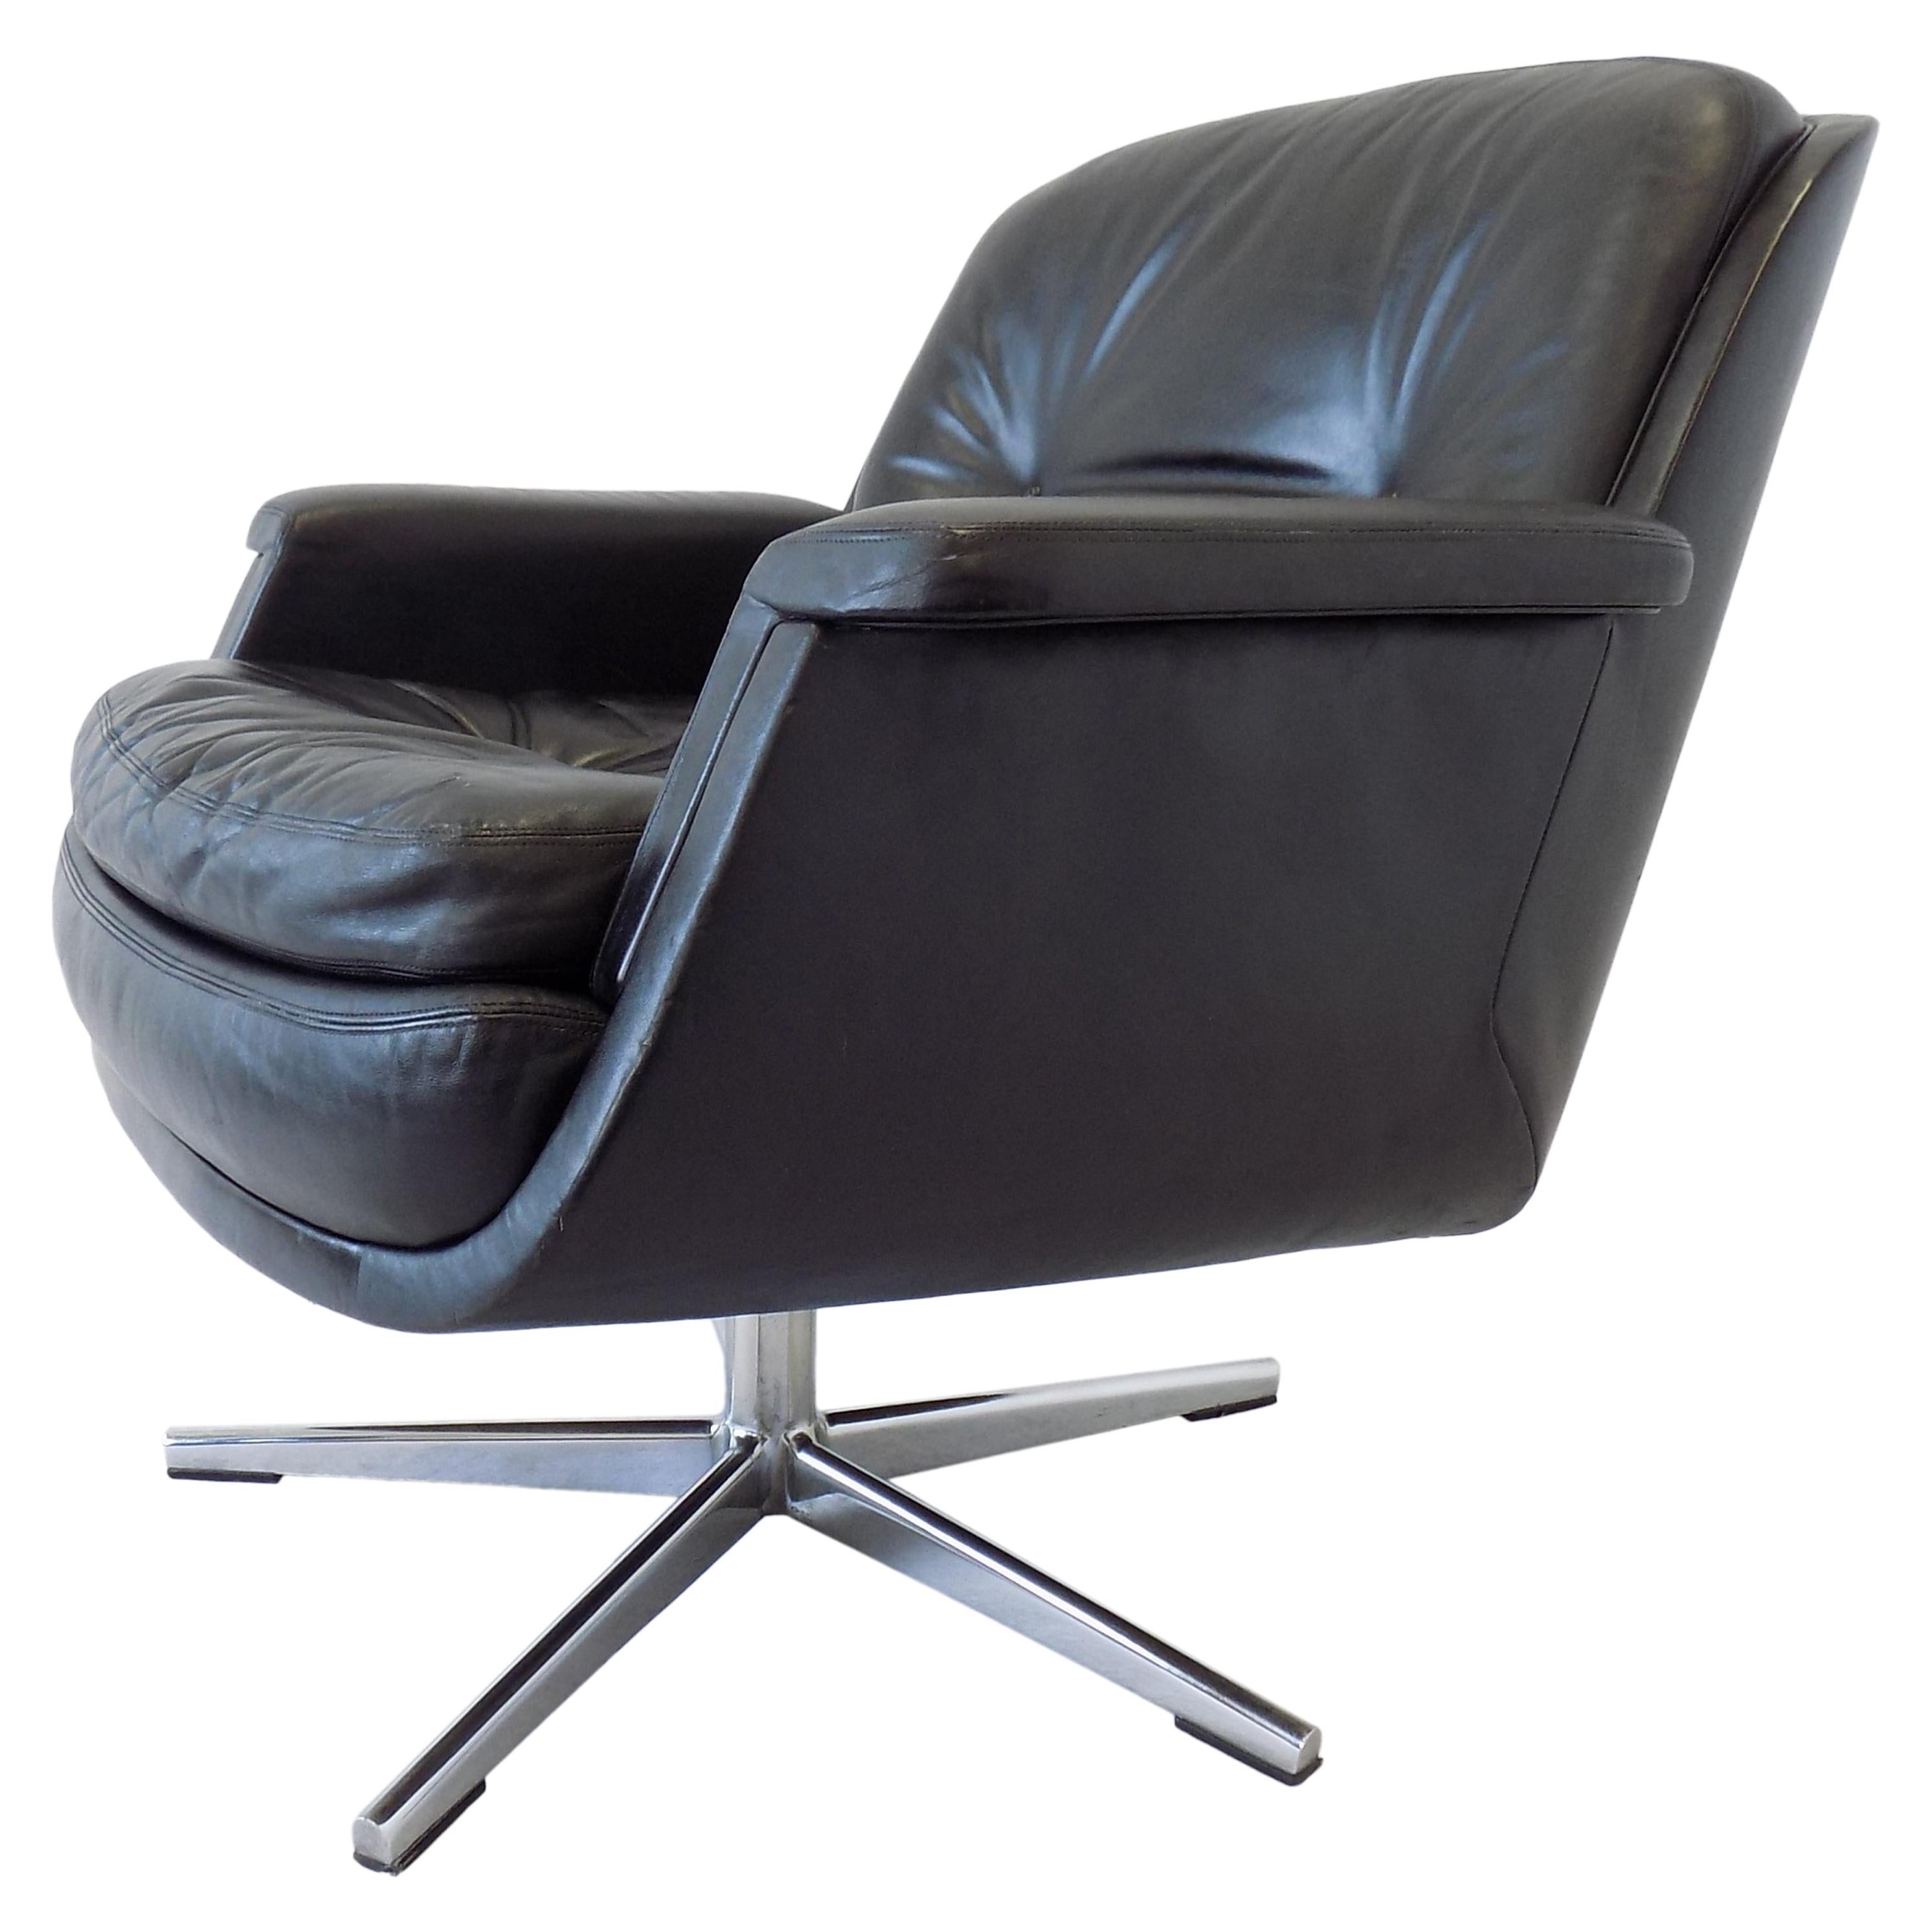 Eugen Schmidt Black Leather Lounge Chair, Boardroom of Krupp Mid-Century modern

Leather armchair of the famous German designer Eugen Schmidt who designed and manufactured the chairs for the German chancellor villa. This chair is in very good